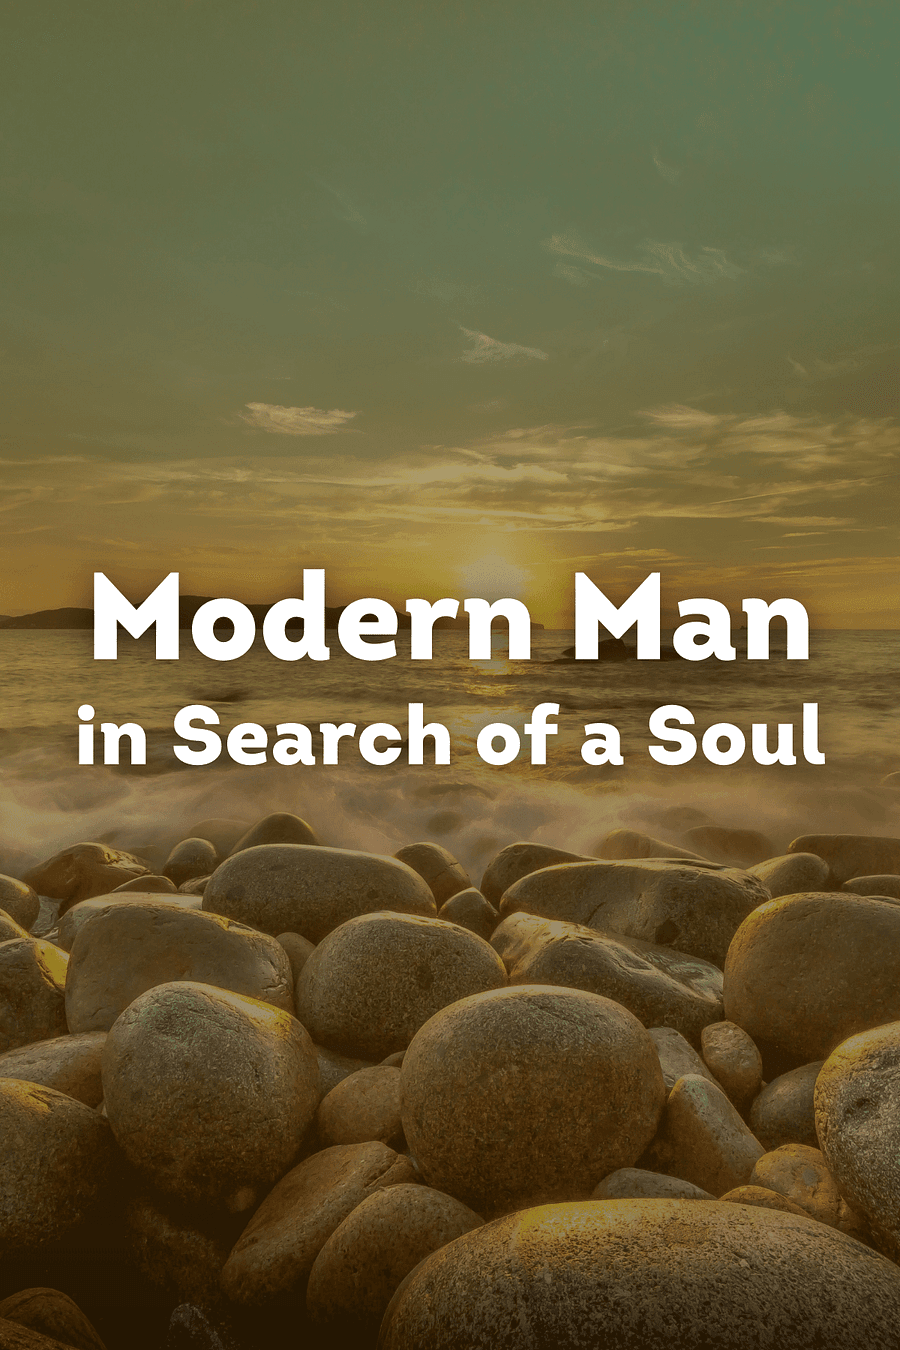 Modern Man in Search of a Soul by Carl Gustav Jung - Book Summary